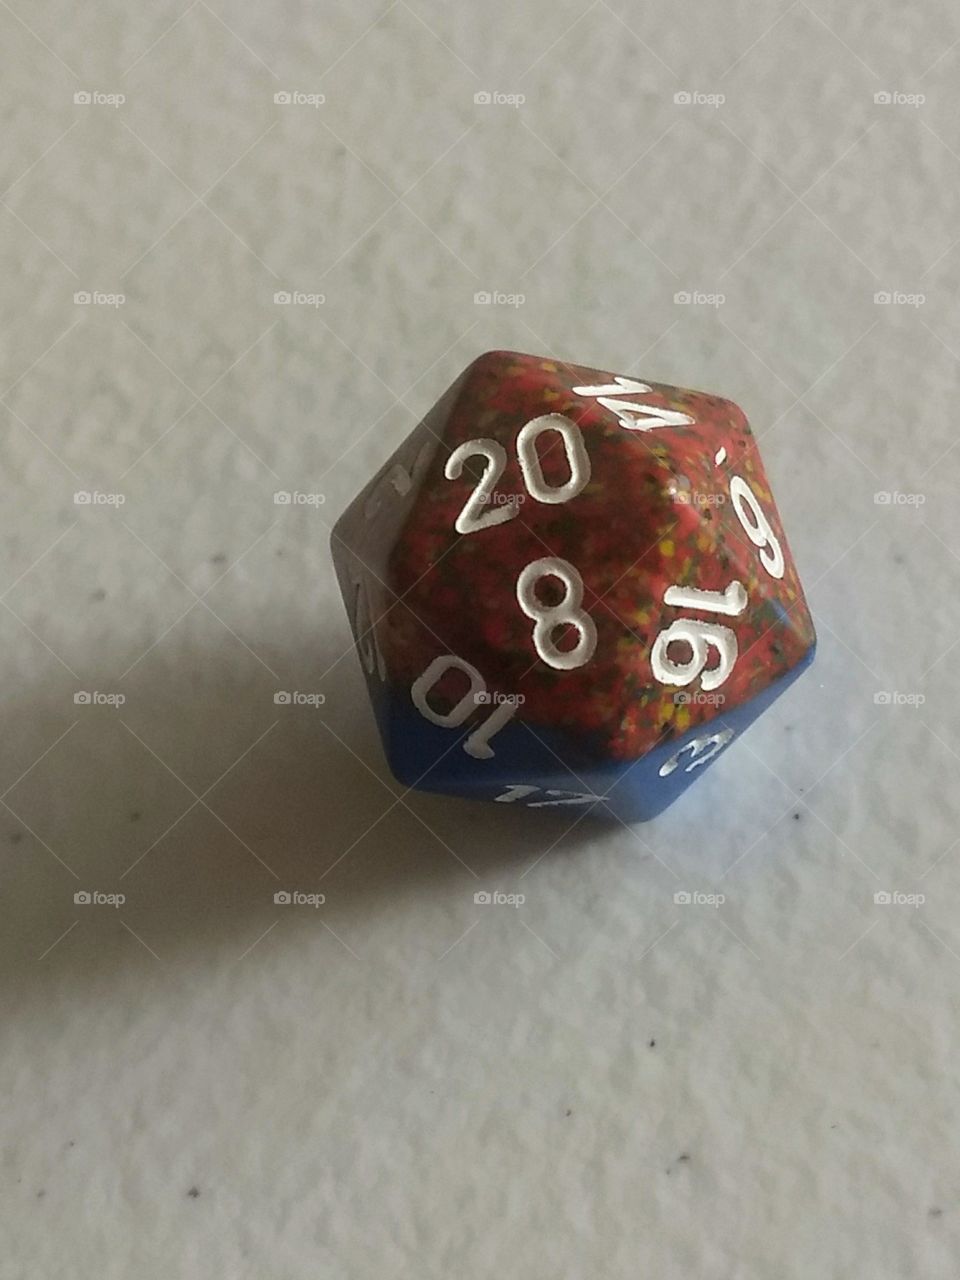 red twenty sided die used in tabletop role-playing games